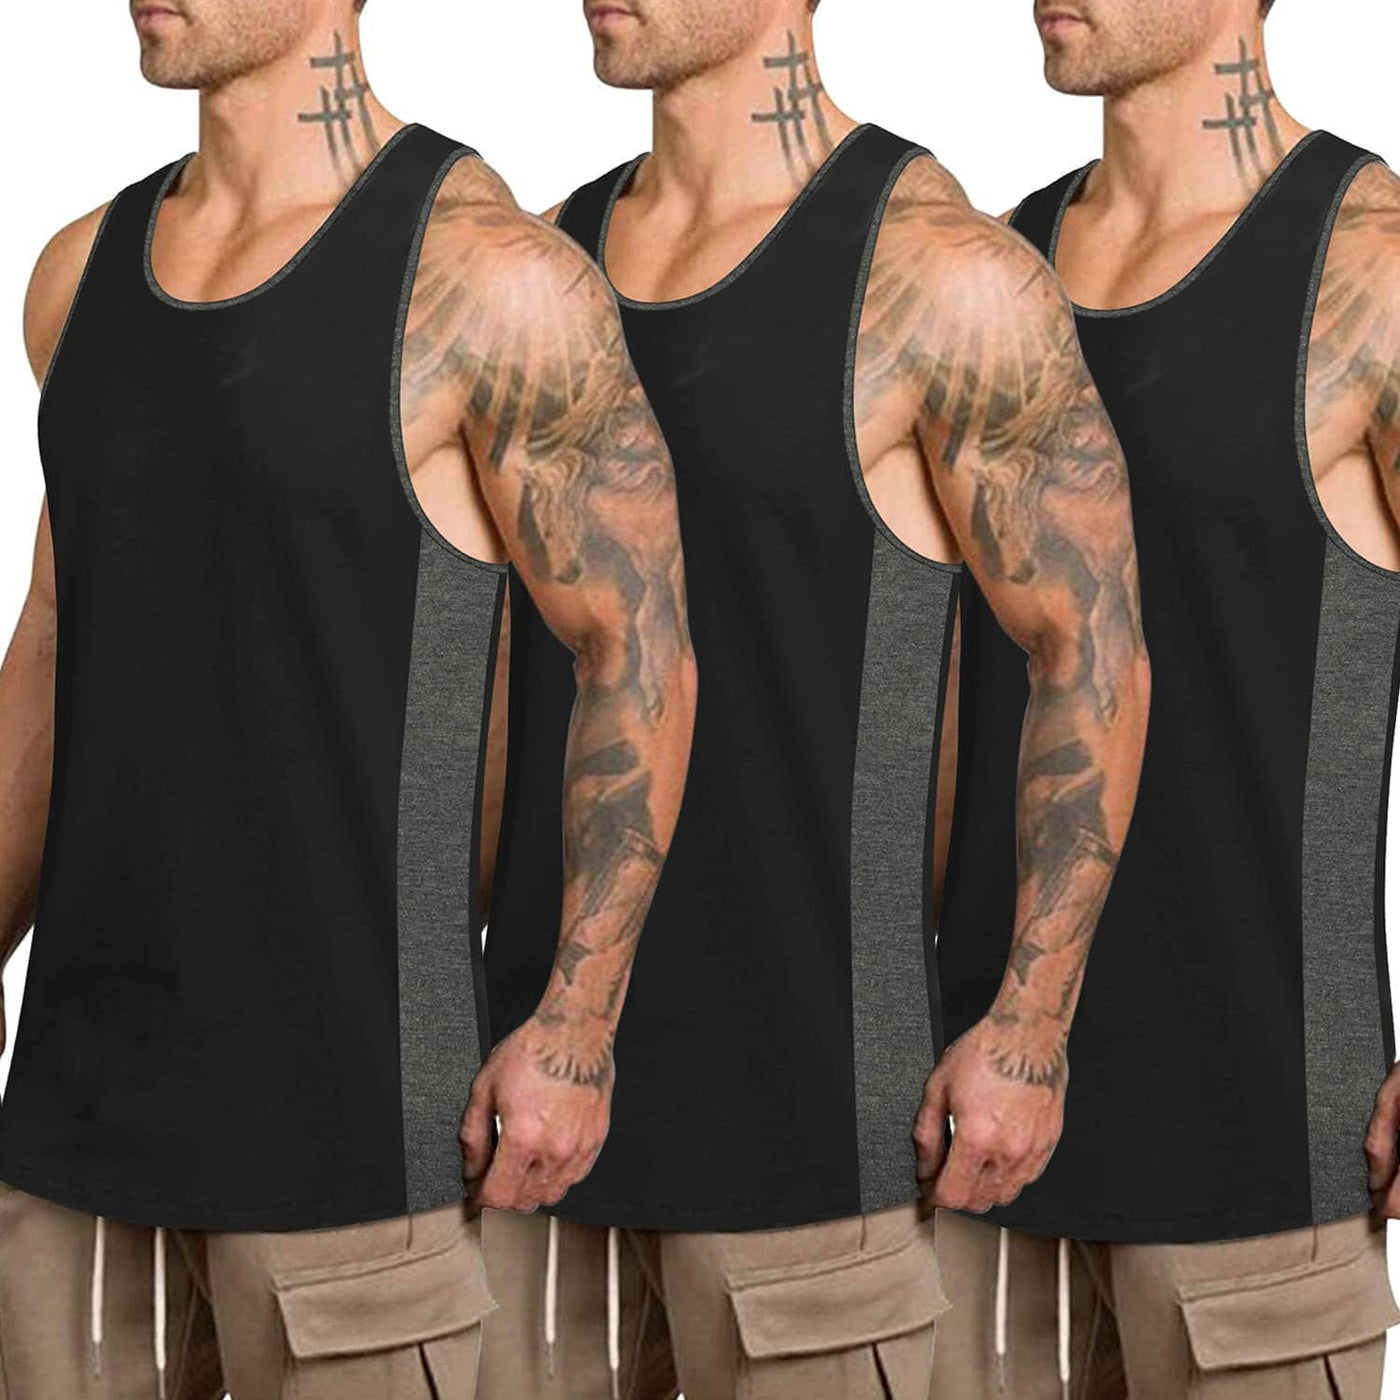 Coofandy 3 Pack Workout Tank Top (US Only) Tank Tops coofandy Black/Black/Black S 